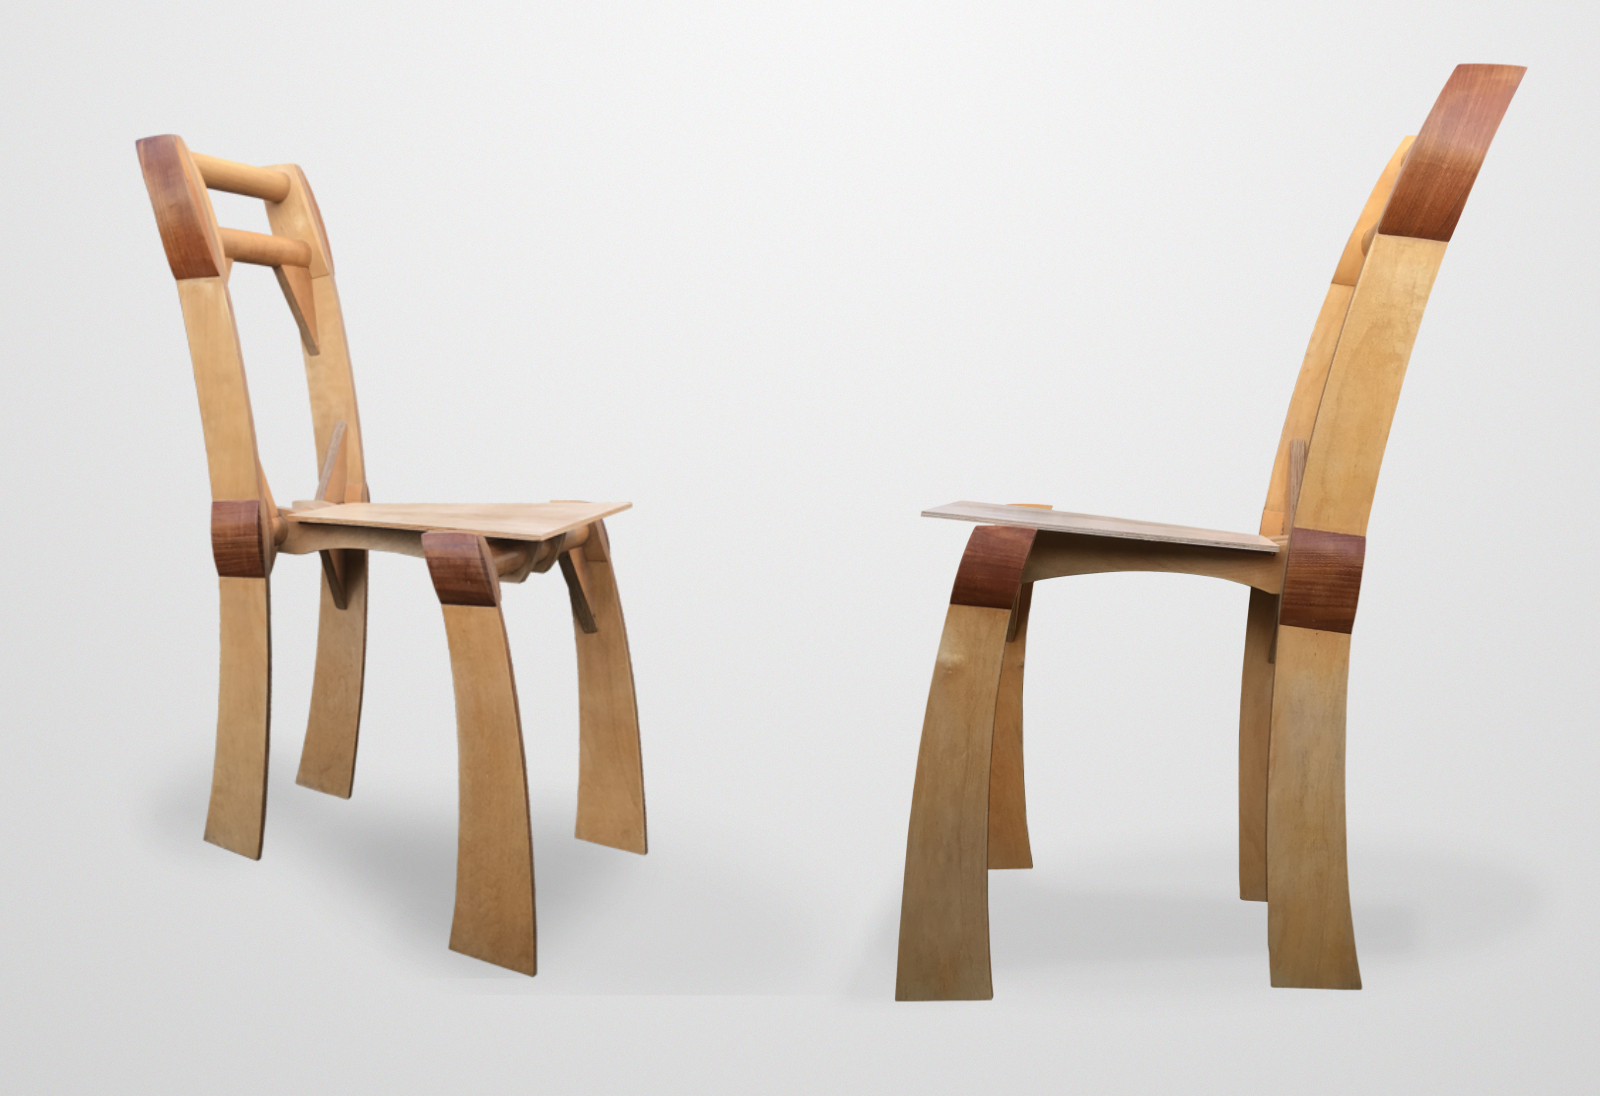 Mmh furniture birch ply and iroko chair